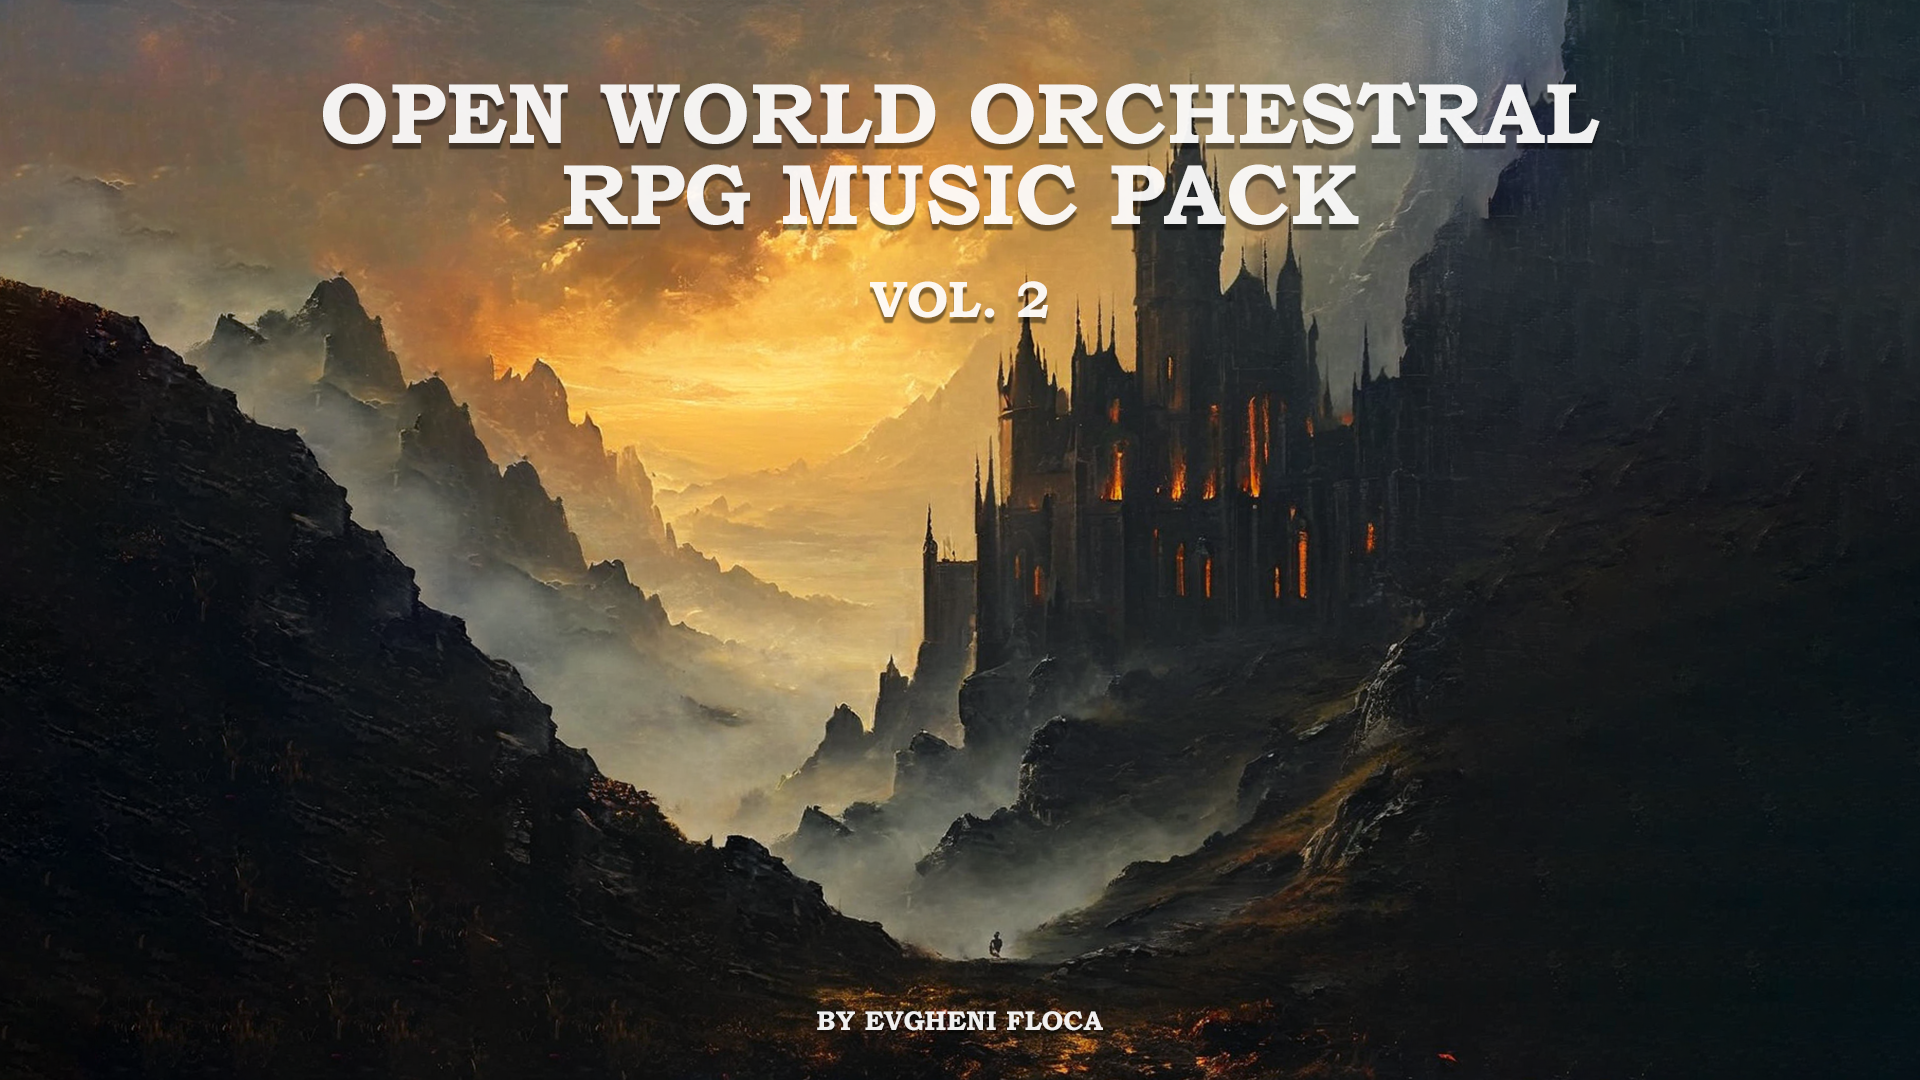 Open World Orchestral RPG Music Pack Vol. 2